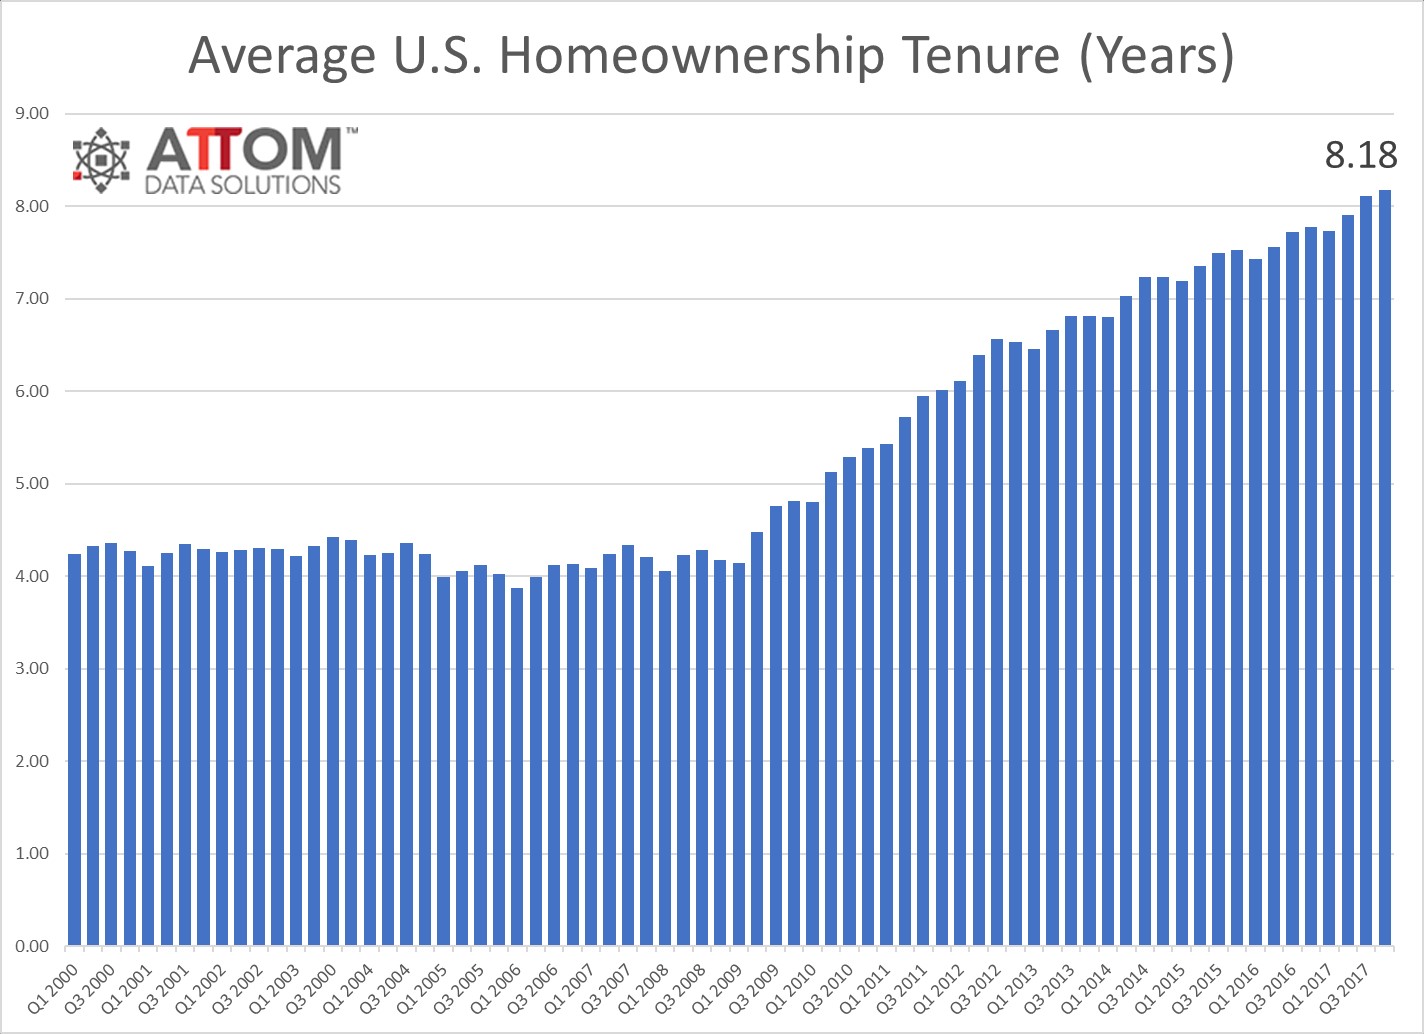 Homeownership Tenure Is At A Record Because Of The Lack Of Housing Supply